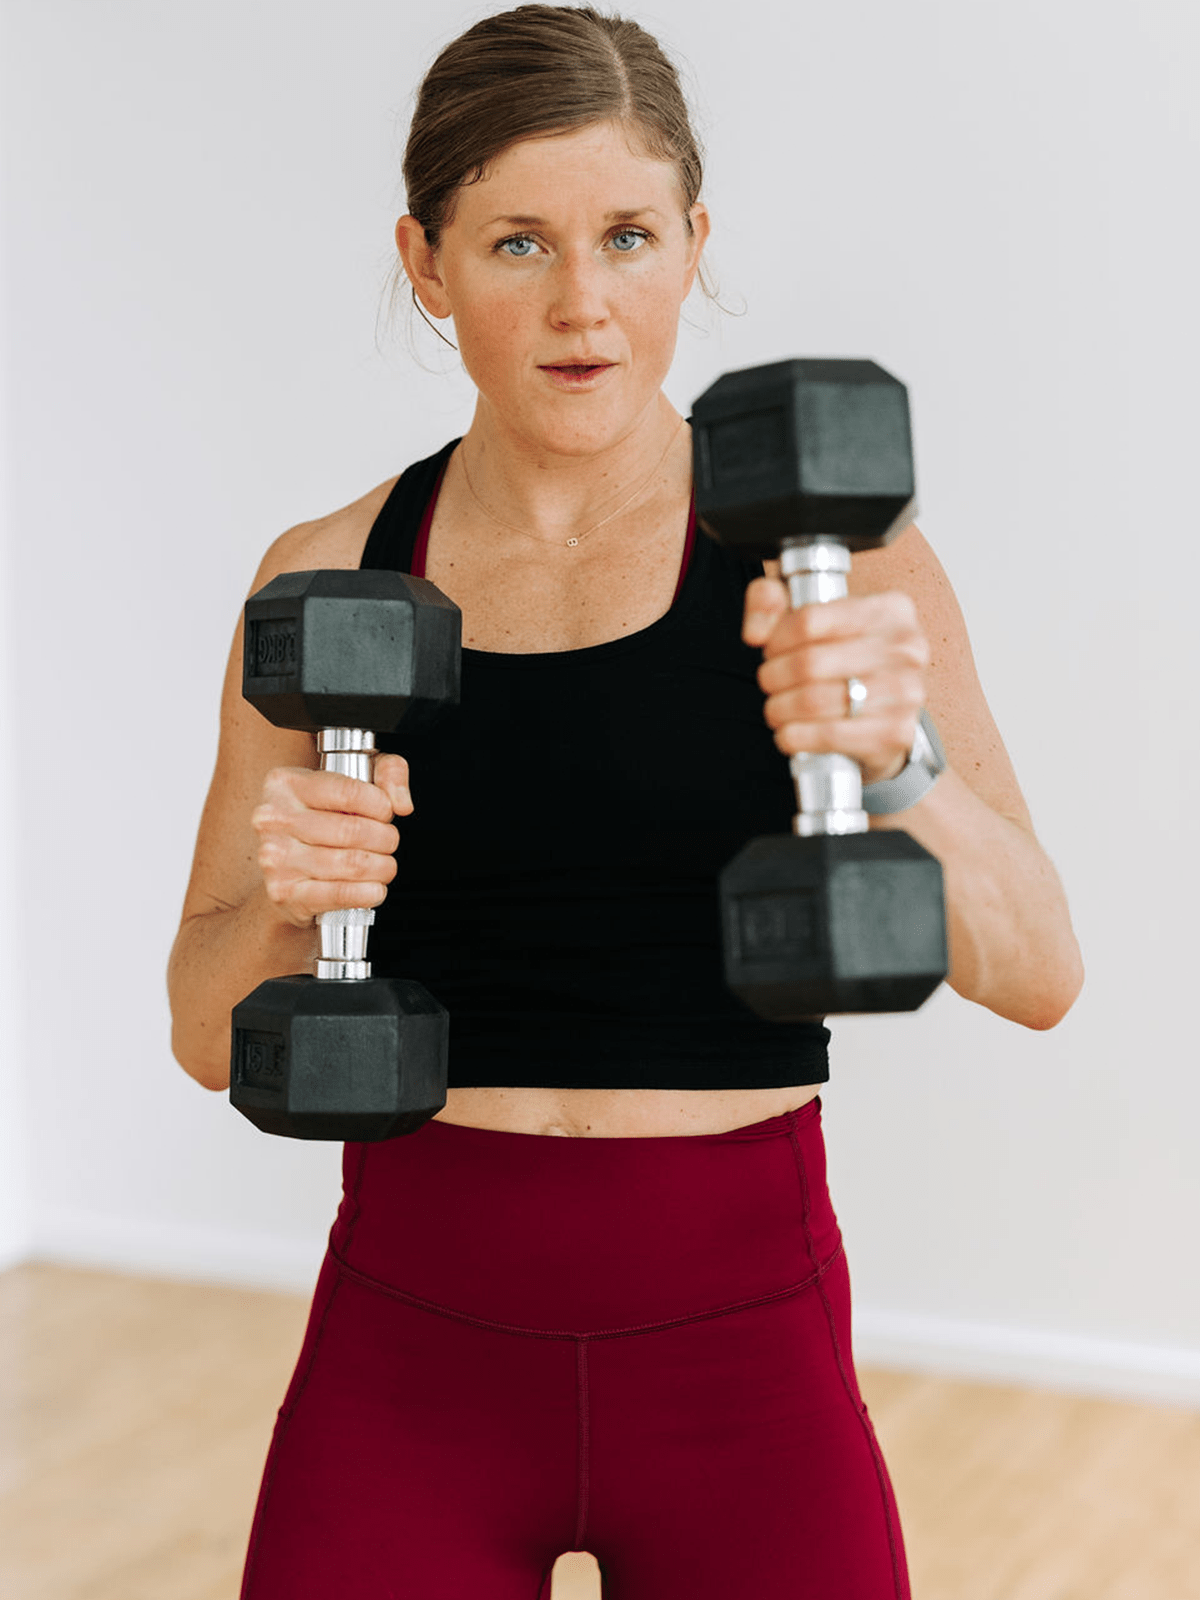 Strengthen Your Arms and Shoulders With This 3-Week Dumbbell Challenge